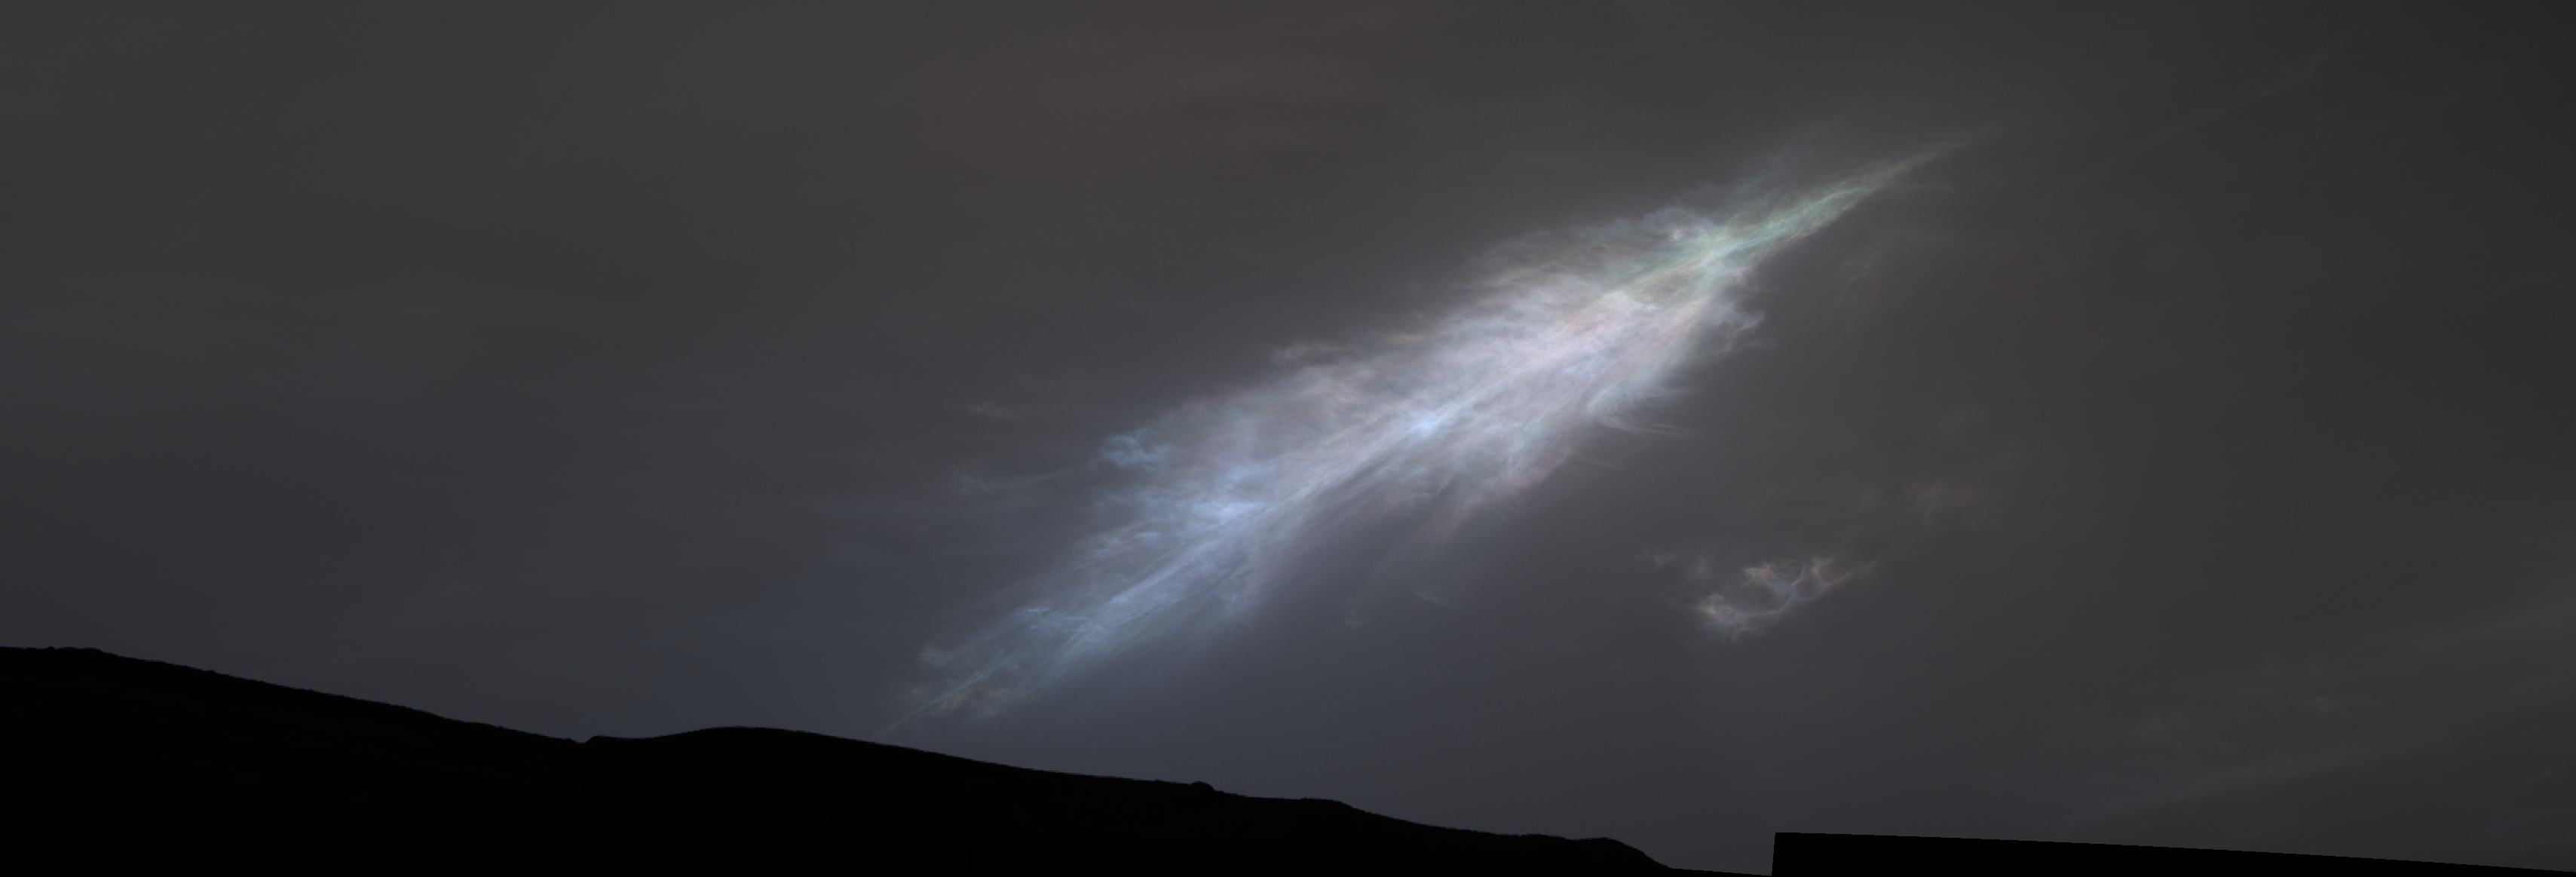 Pinnate iridescent clouds just after sunset on Mars.